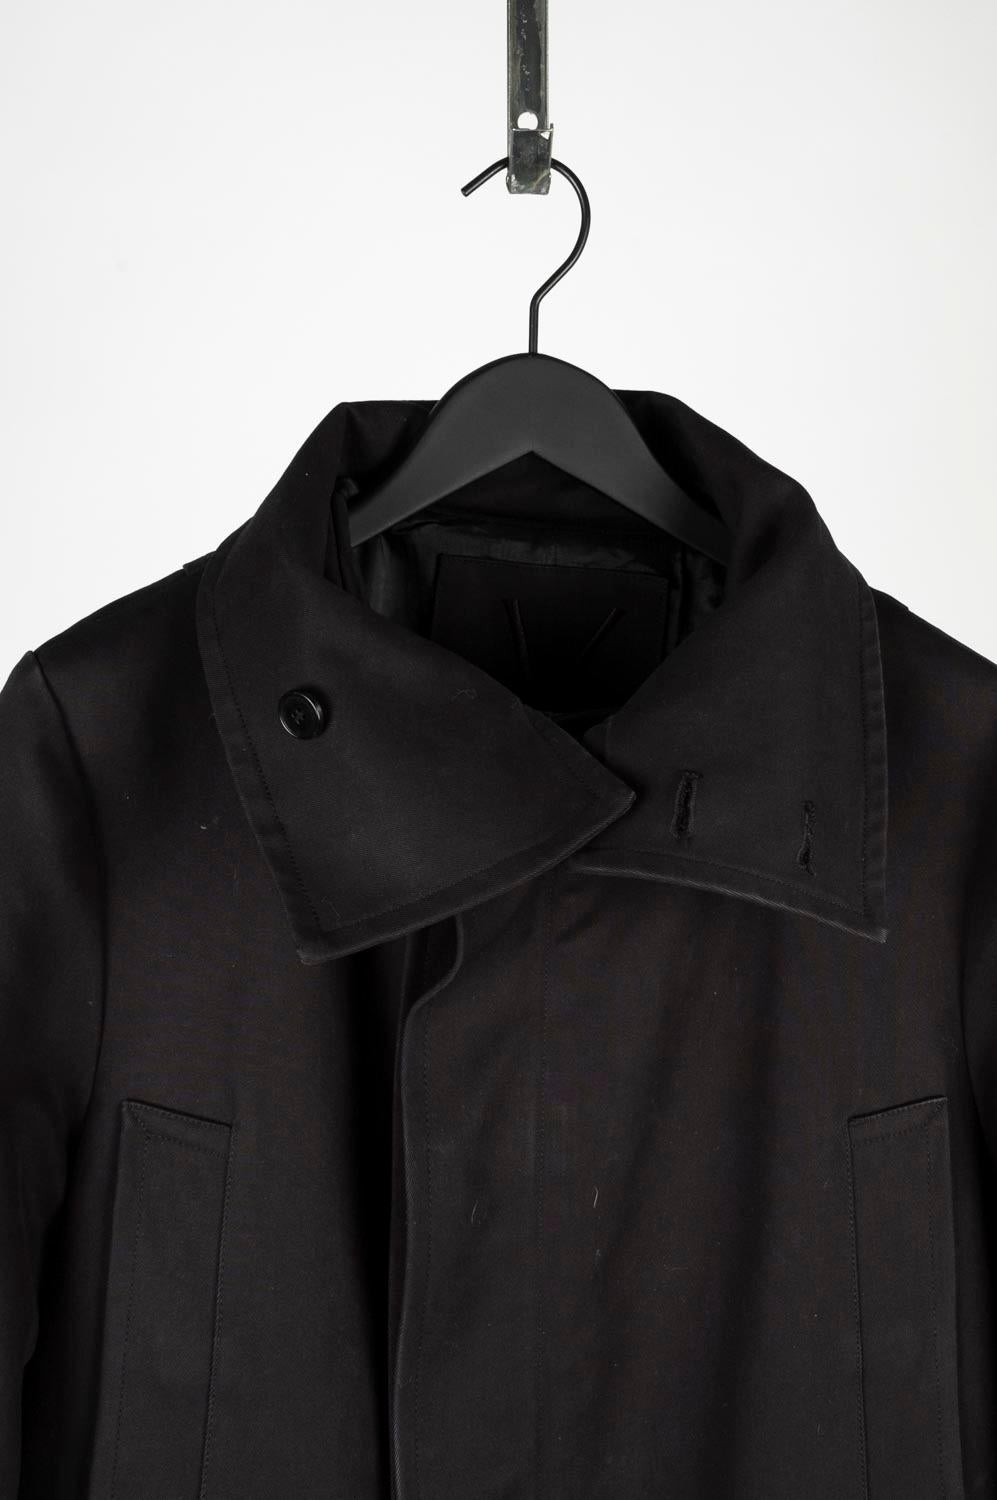 100% genuine Yves Saint Laurent Men Minimal Coat by Tom Ford, S550
Color: Black
(An actual color may a bit vary due to individual computer screen interpretation)
Material: 100% cotton
Tag size: 50 (Large)
This coat is great quality item. Rate 8.5 of